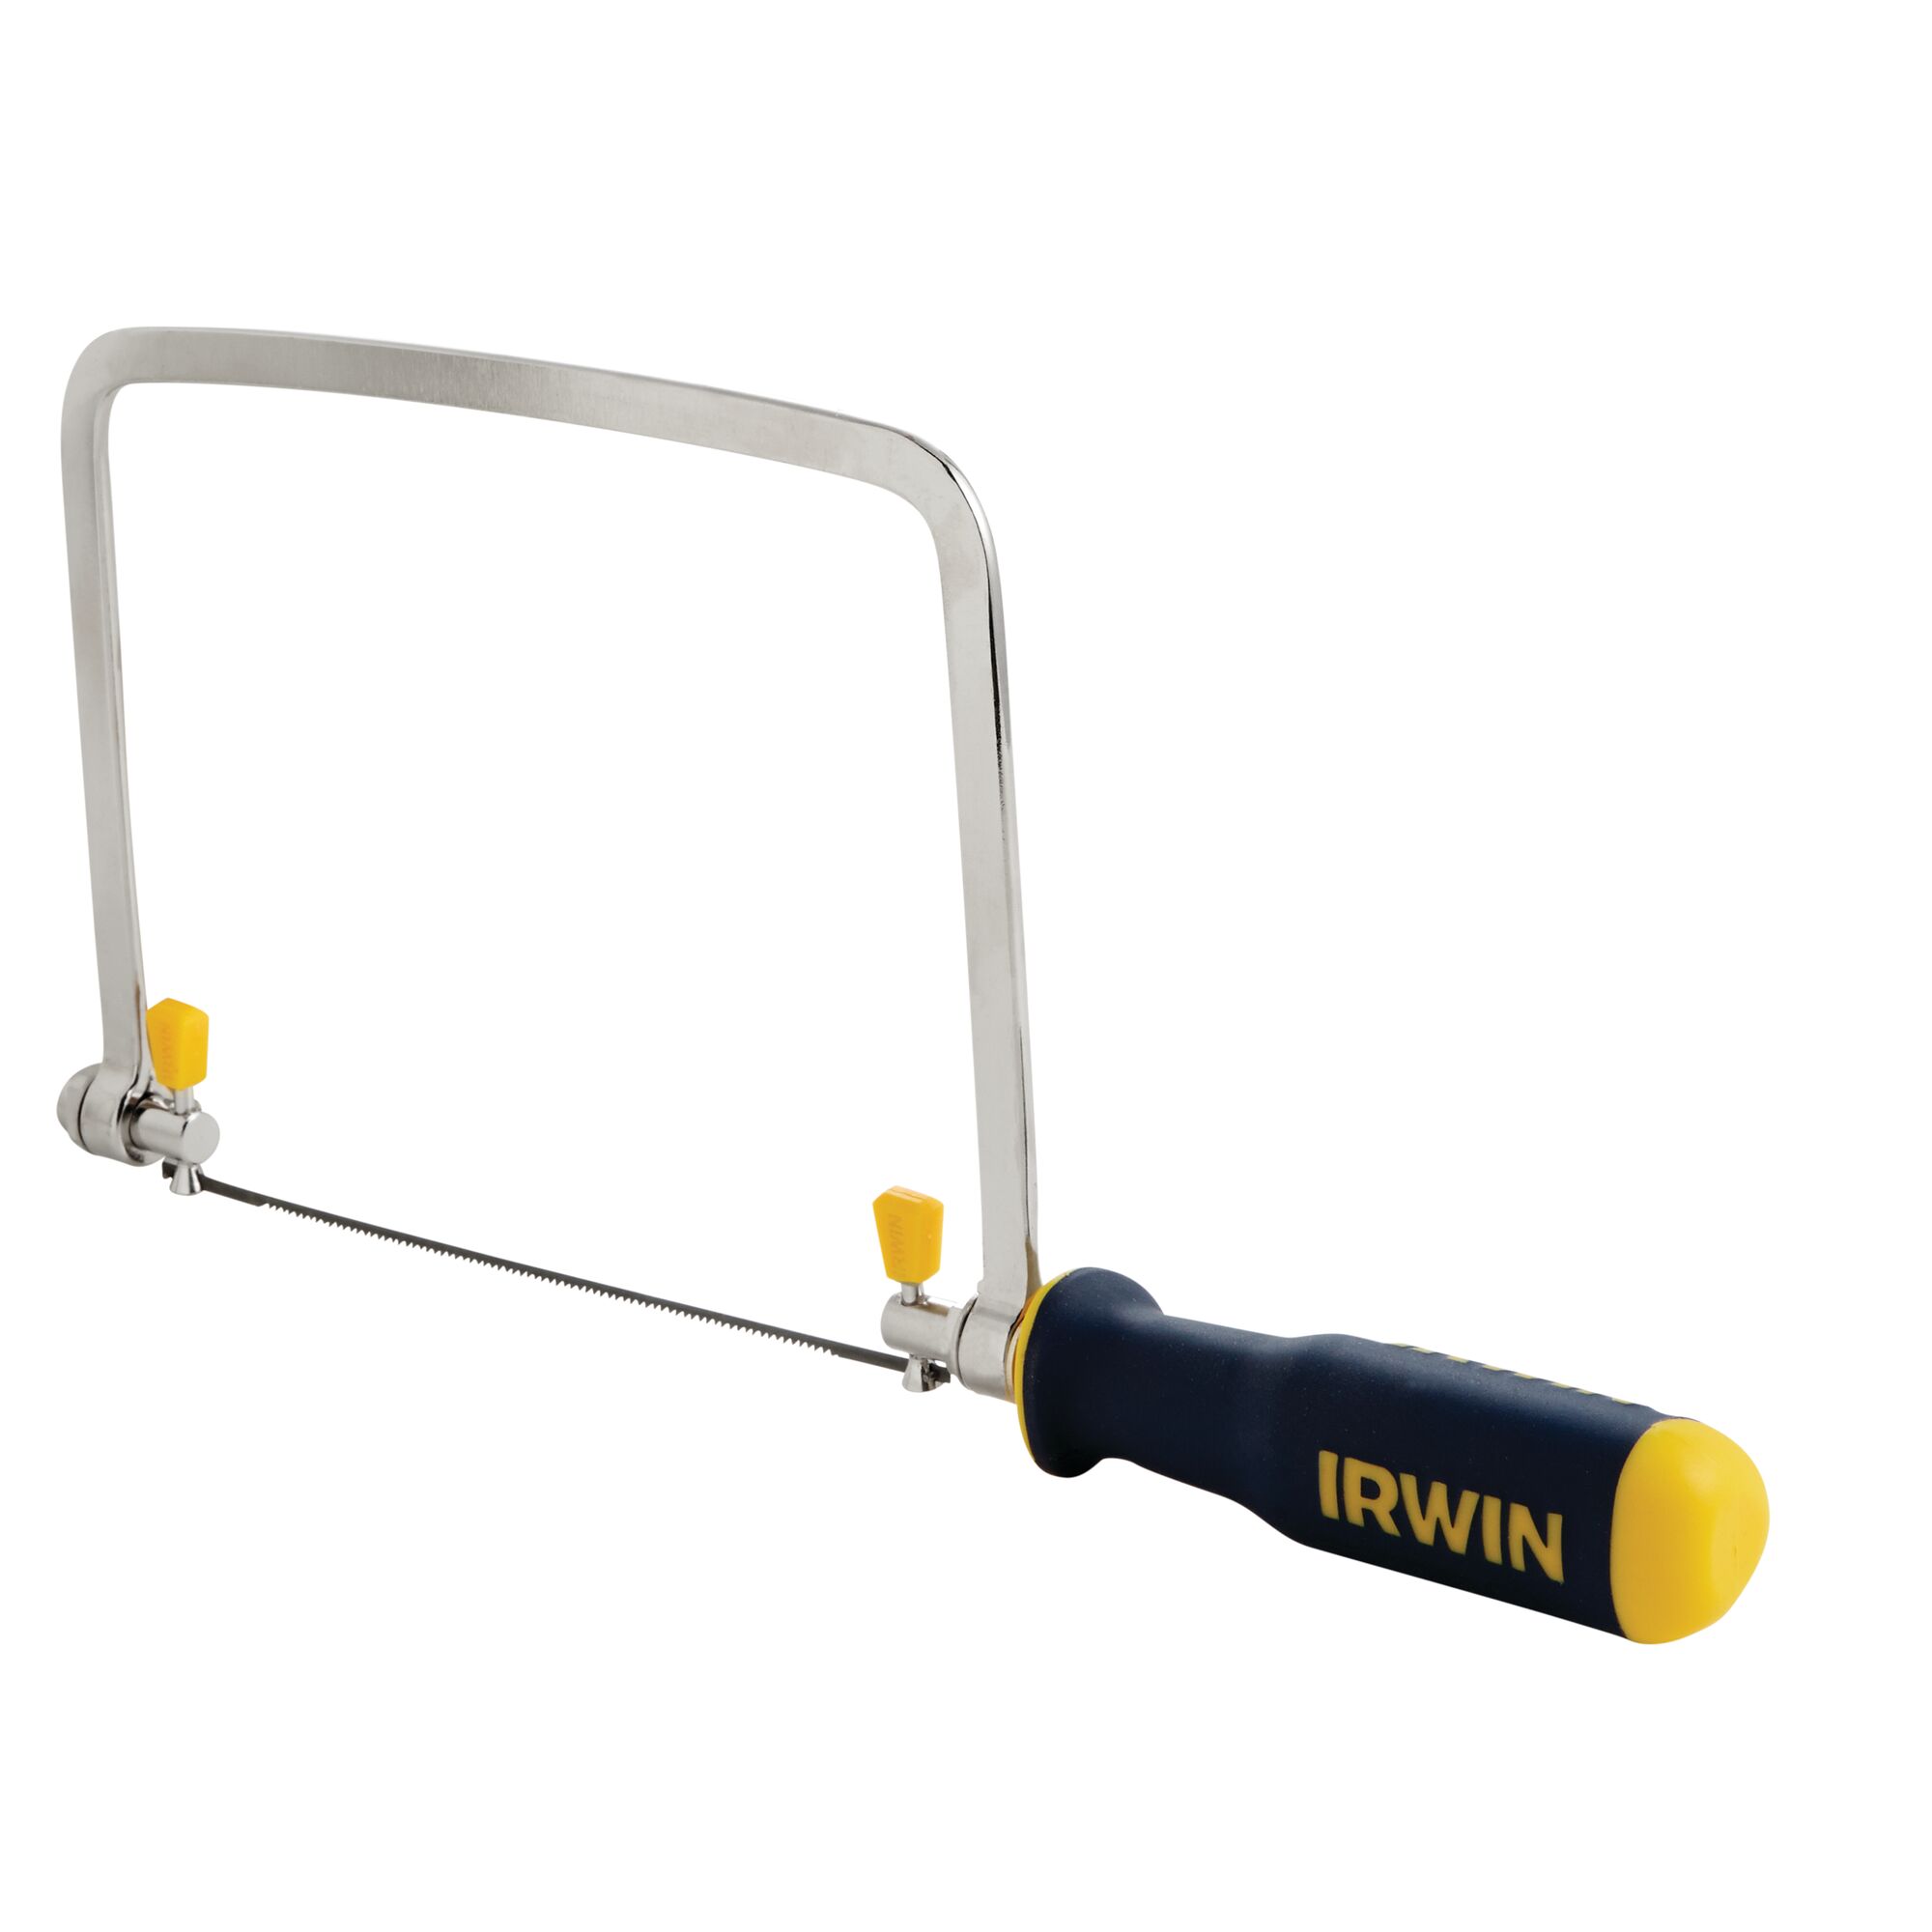 6-1/2 ProToucha Coping Saw